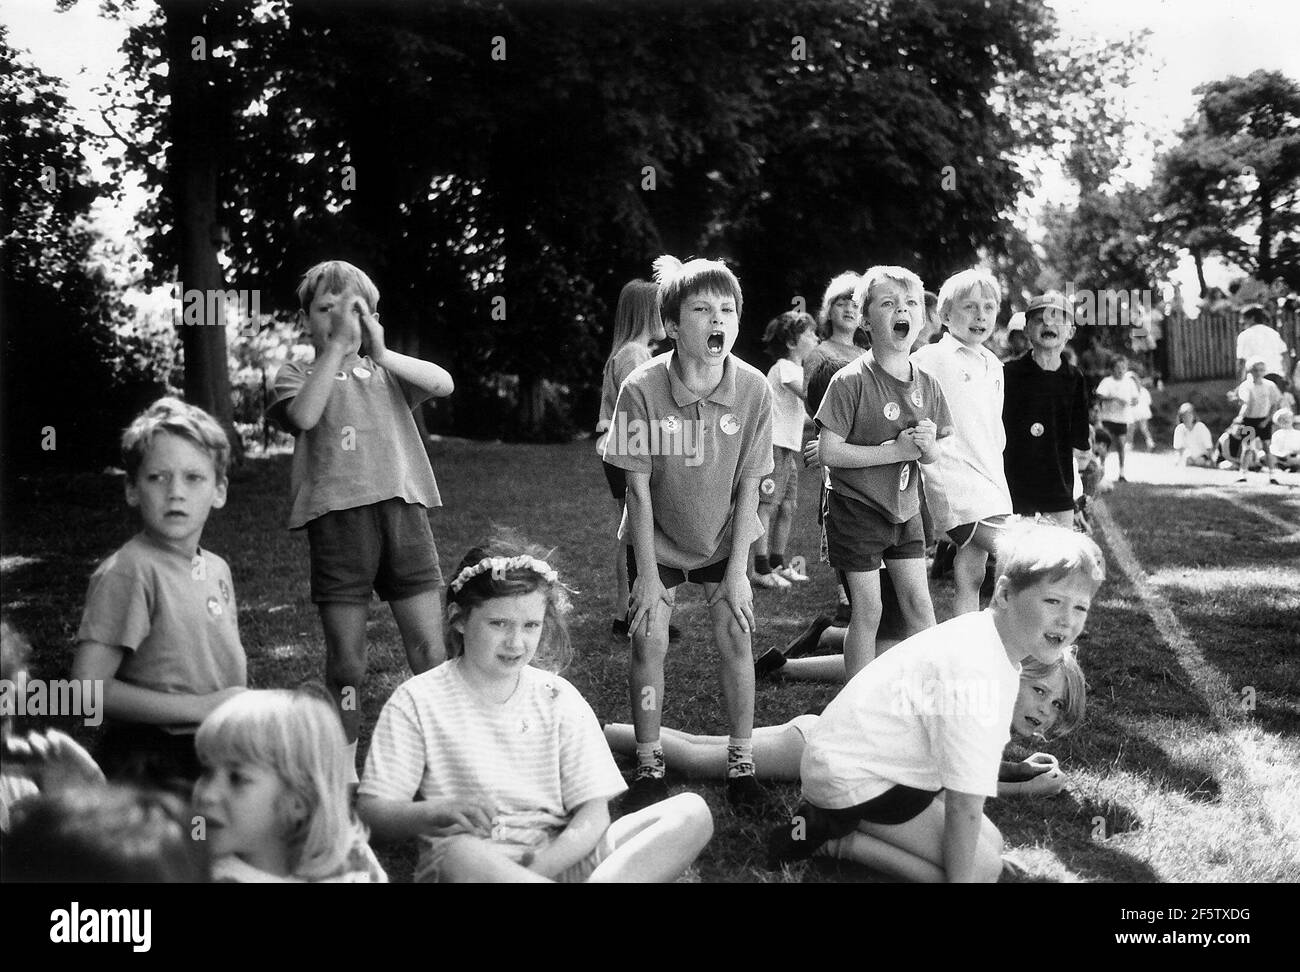 Children cheer on classmates taking part in a race at an Infants School Children Sports Day at RAB Infants School in Saffron Walden Essex Dbase Stock Photo